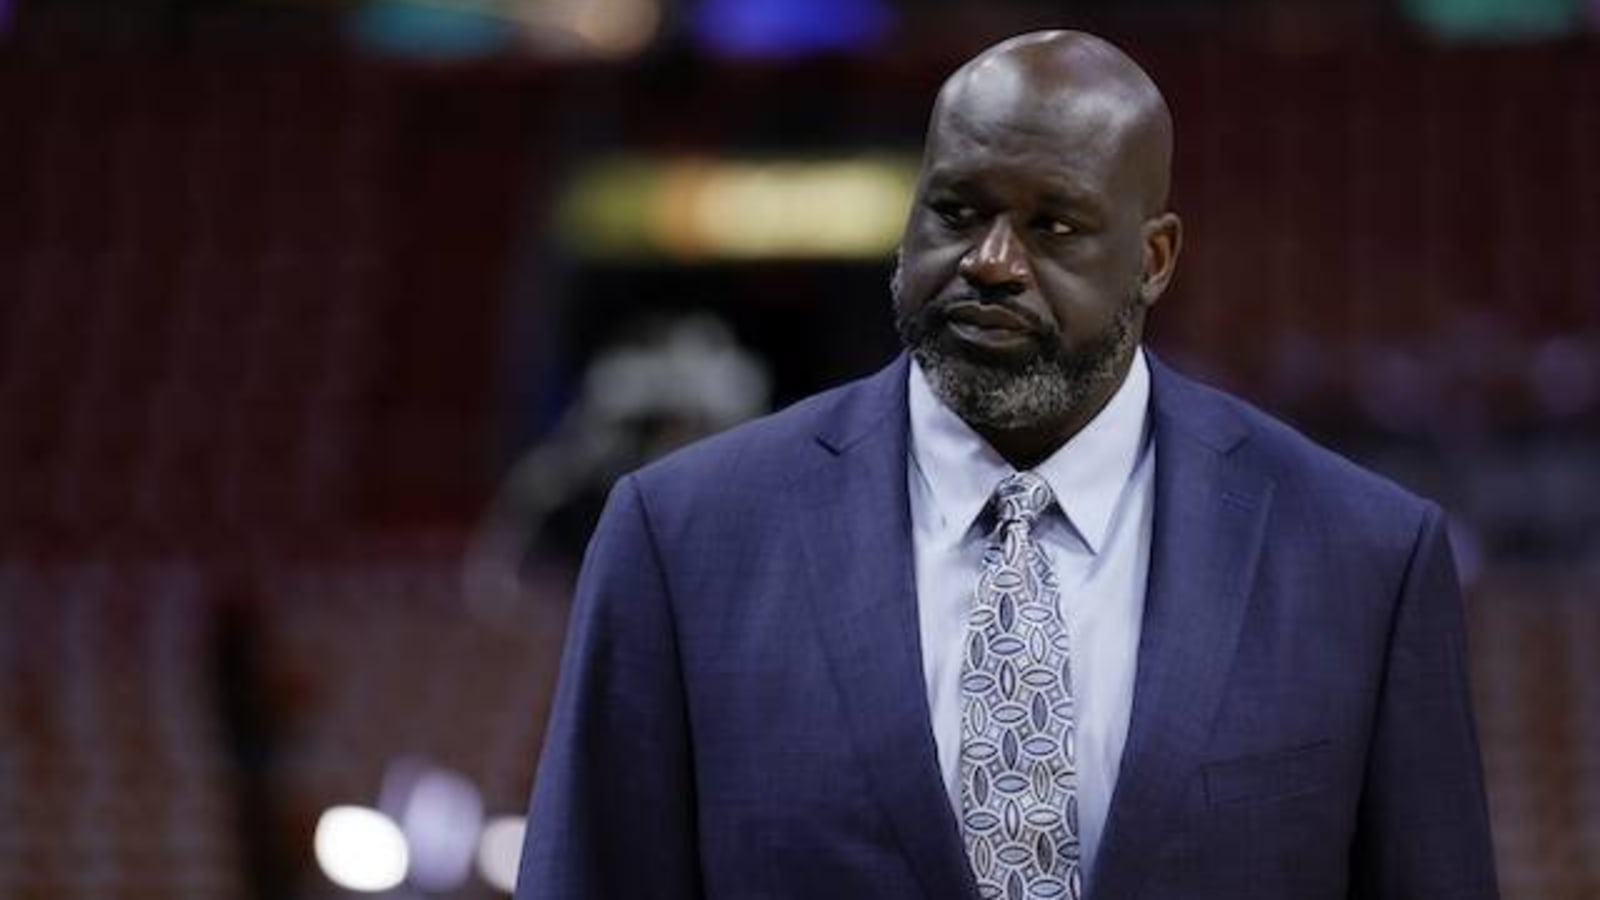  Shaquille O’Neal Puts Out Diss Track Amid Beef With Shannon Sharpe